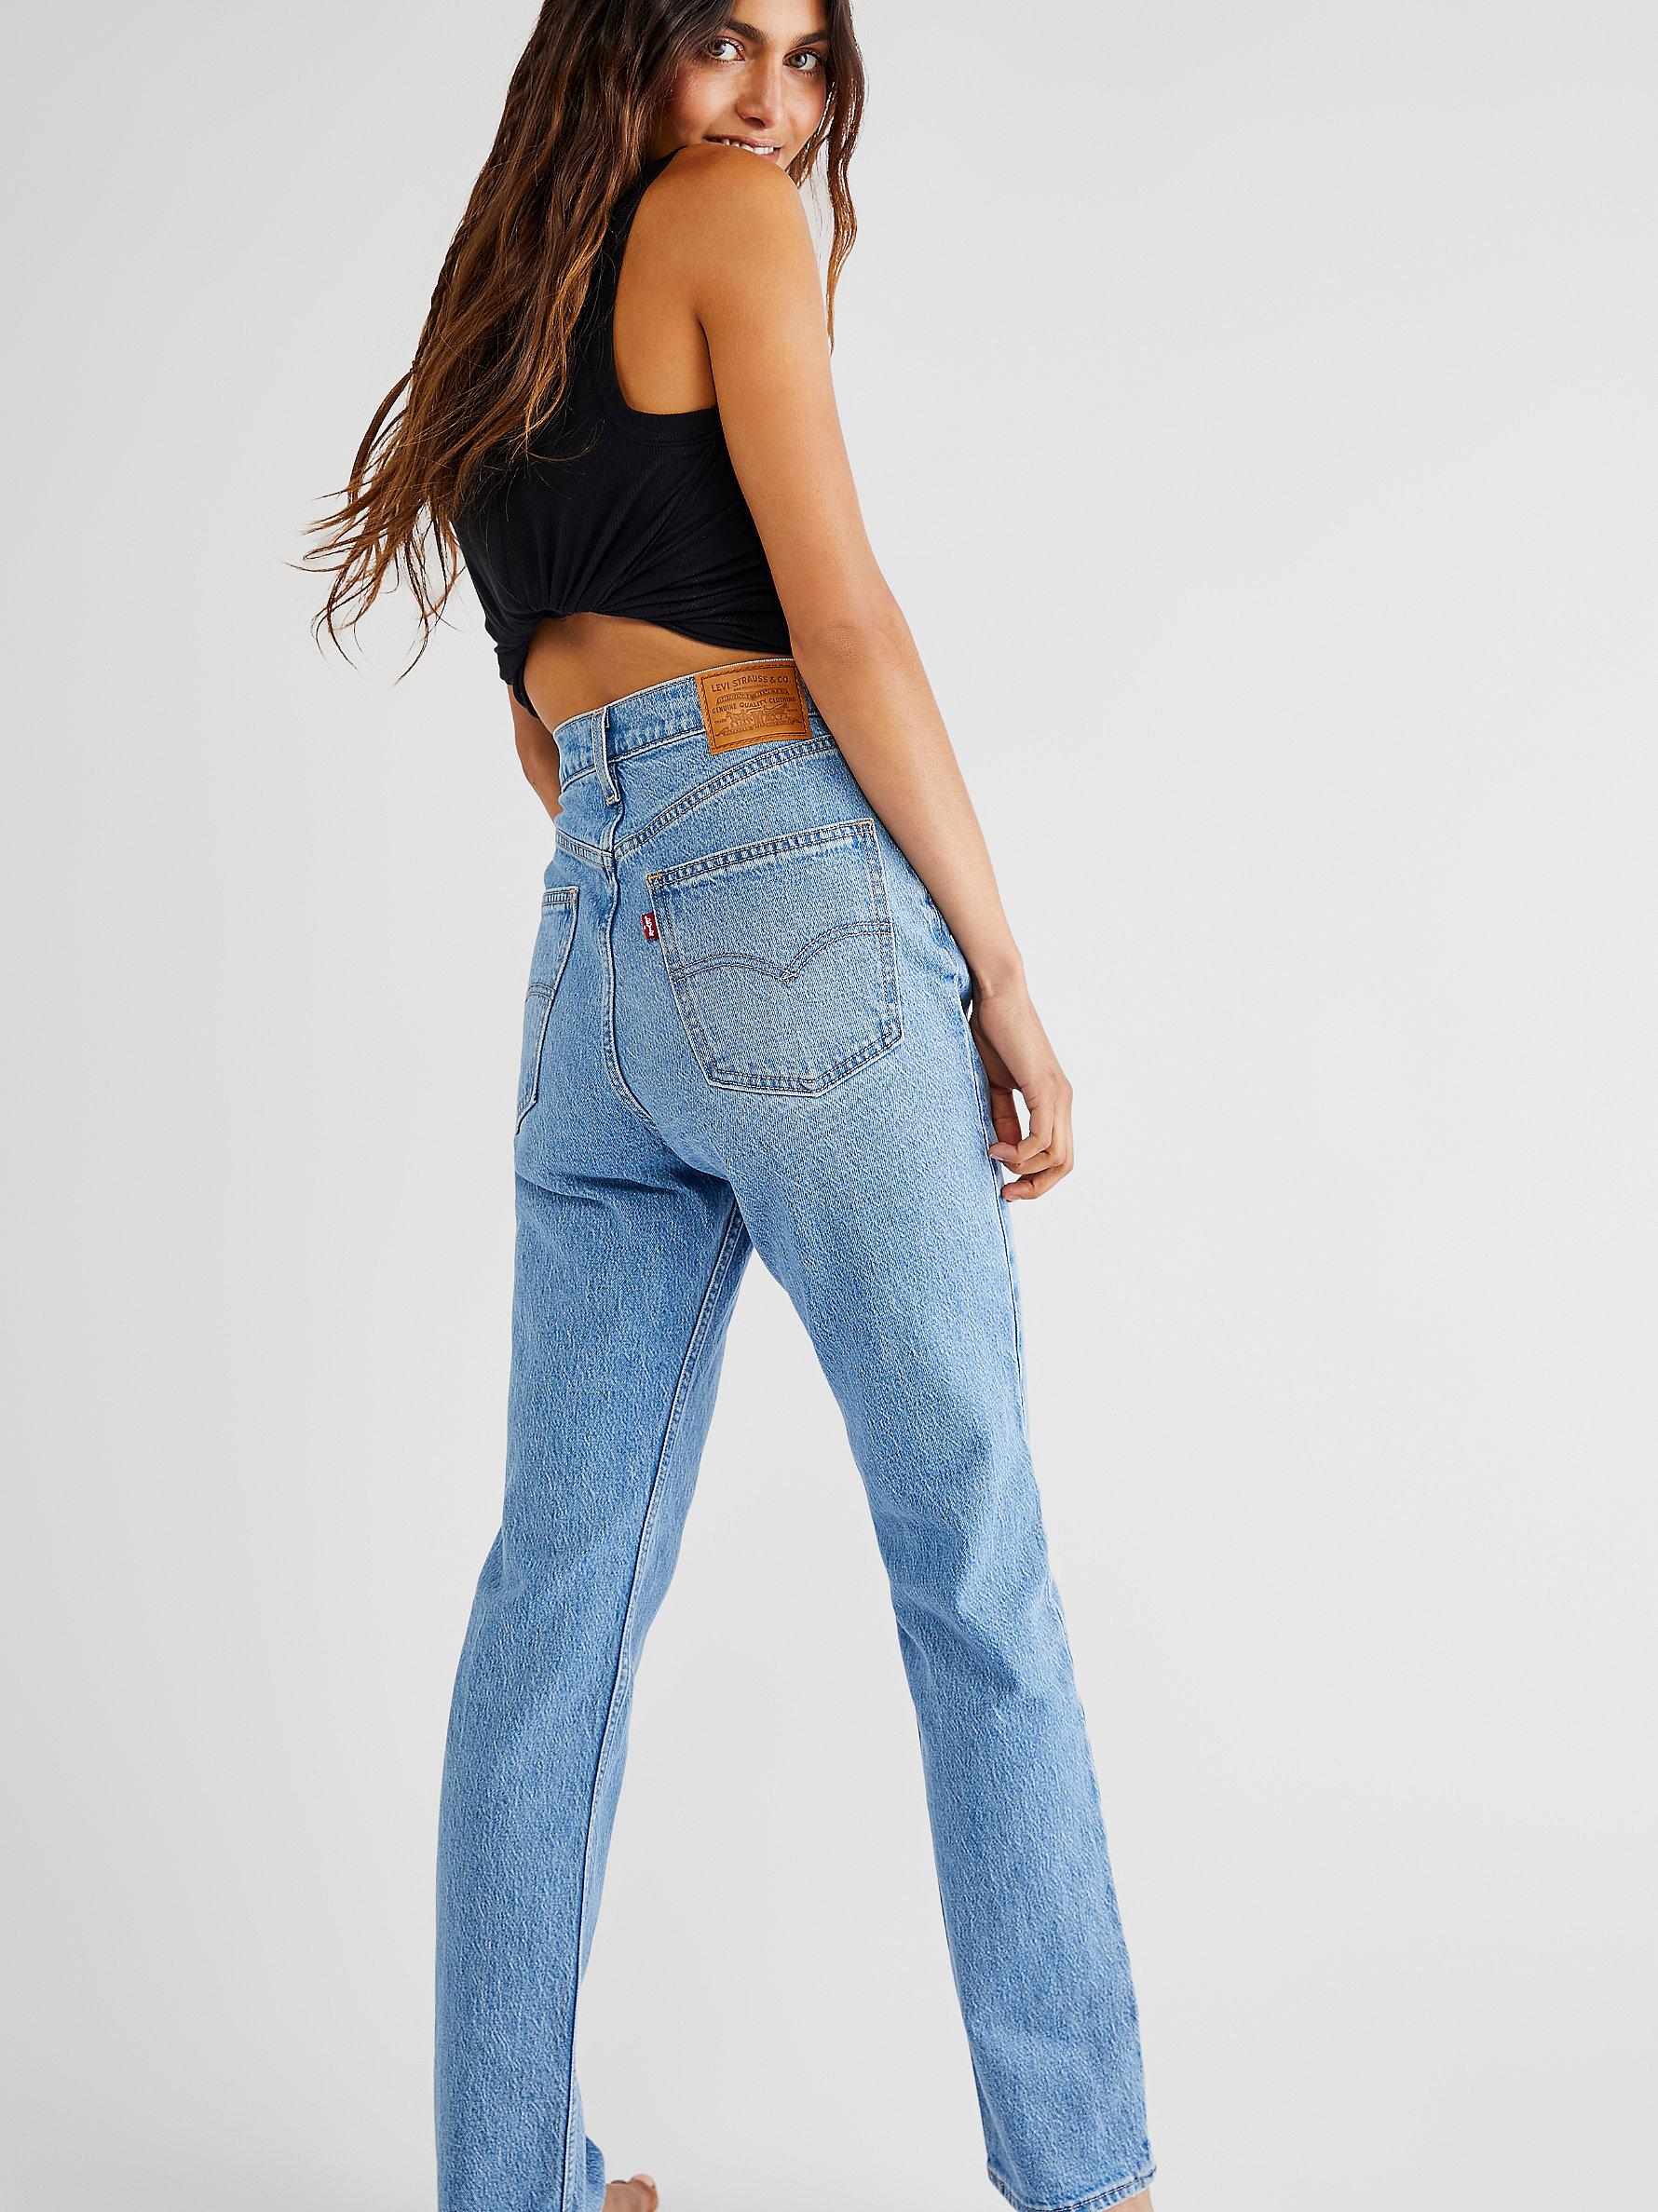 Free People Levi's 70's High Slim Straight Jeans in Blue | Lyst